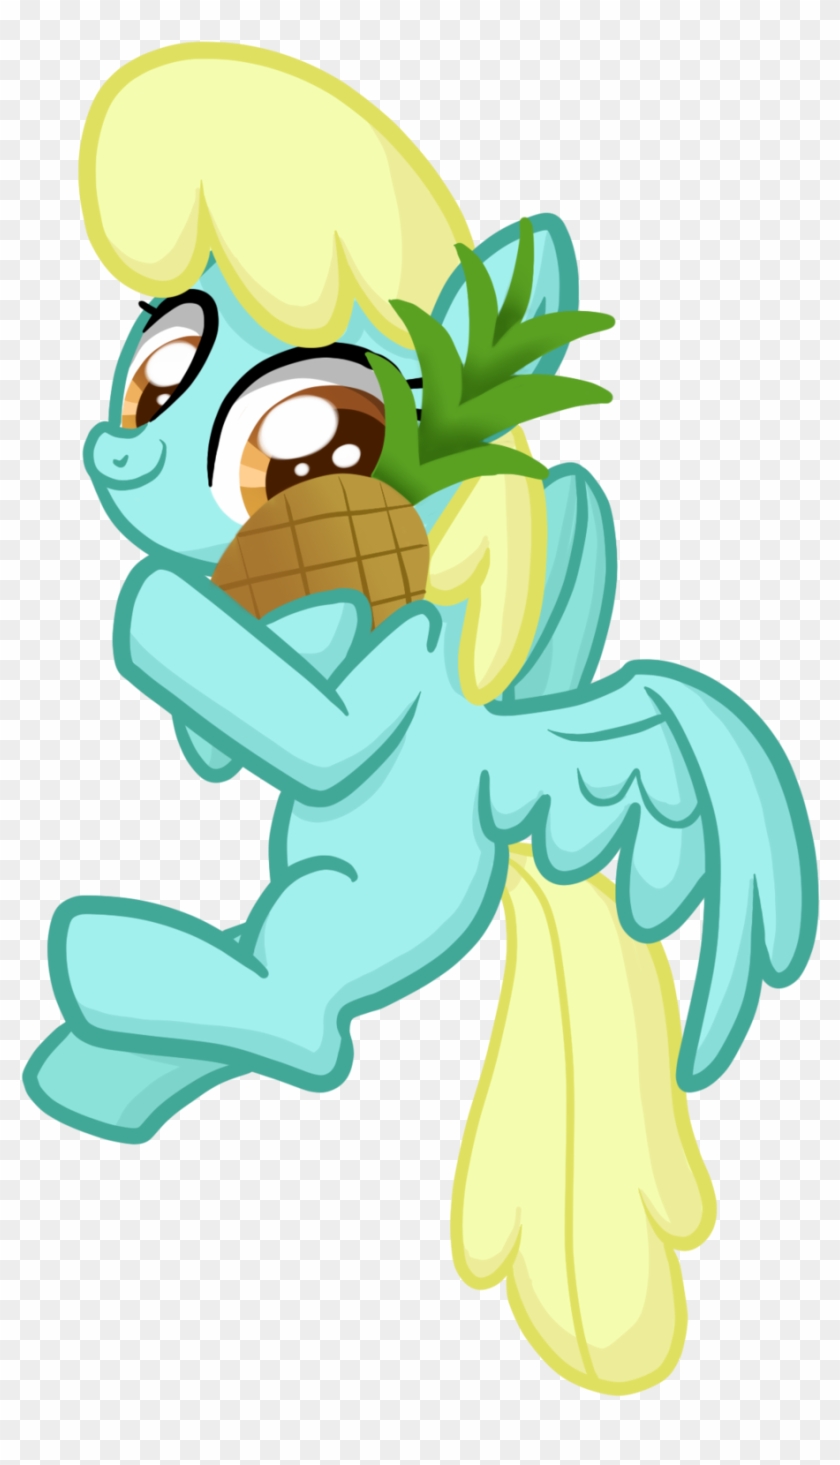 Pineapple Pony By Thecheeseburger Pineapple Pony By - My Little Pony Pineapple #938455